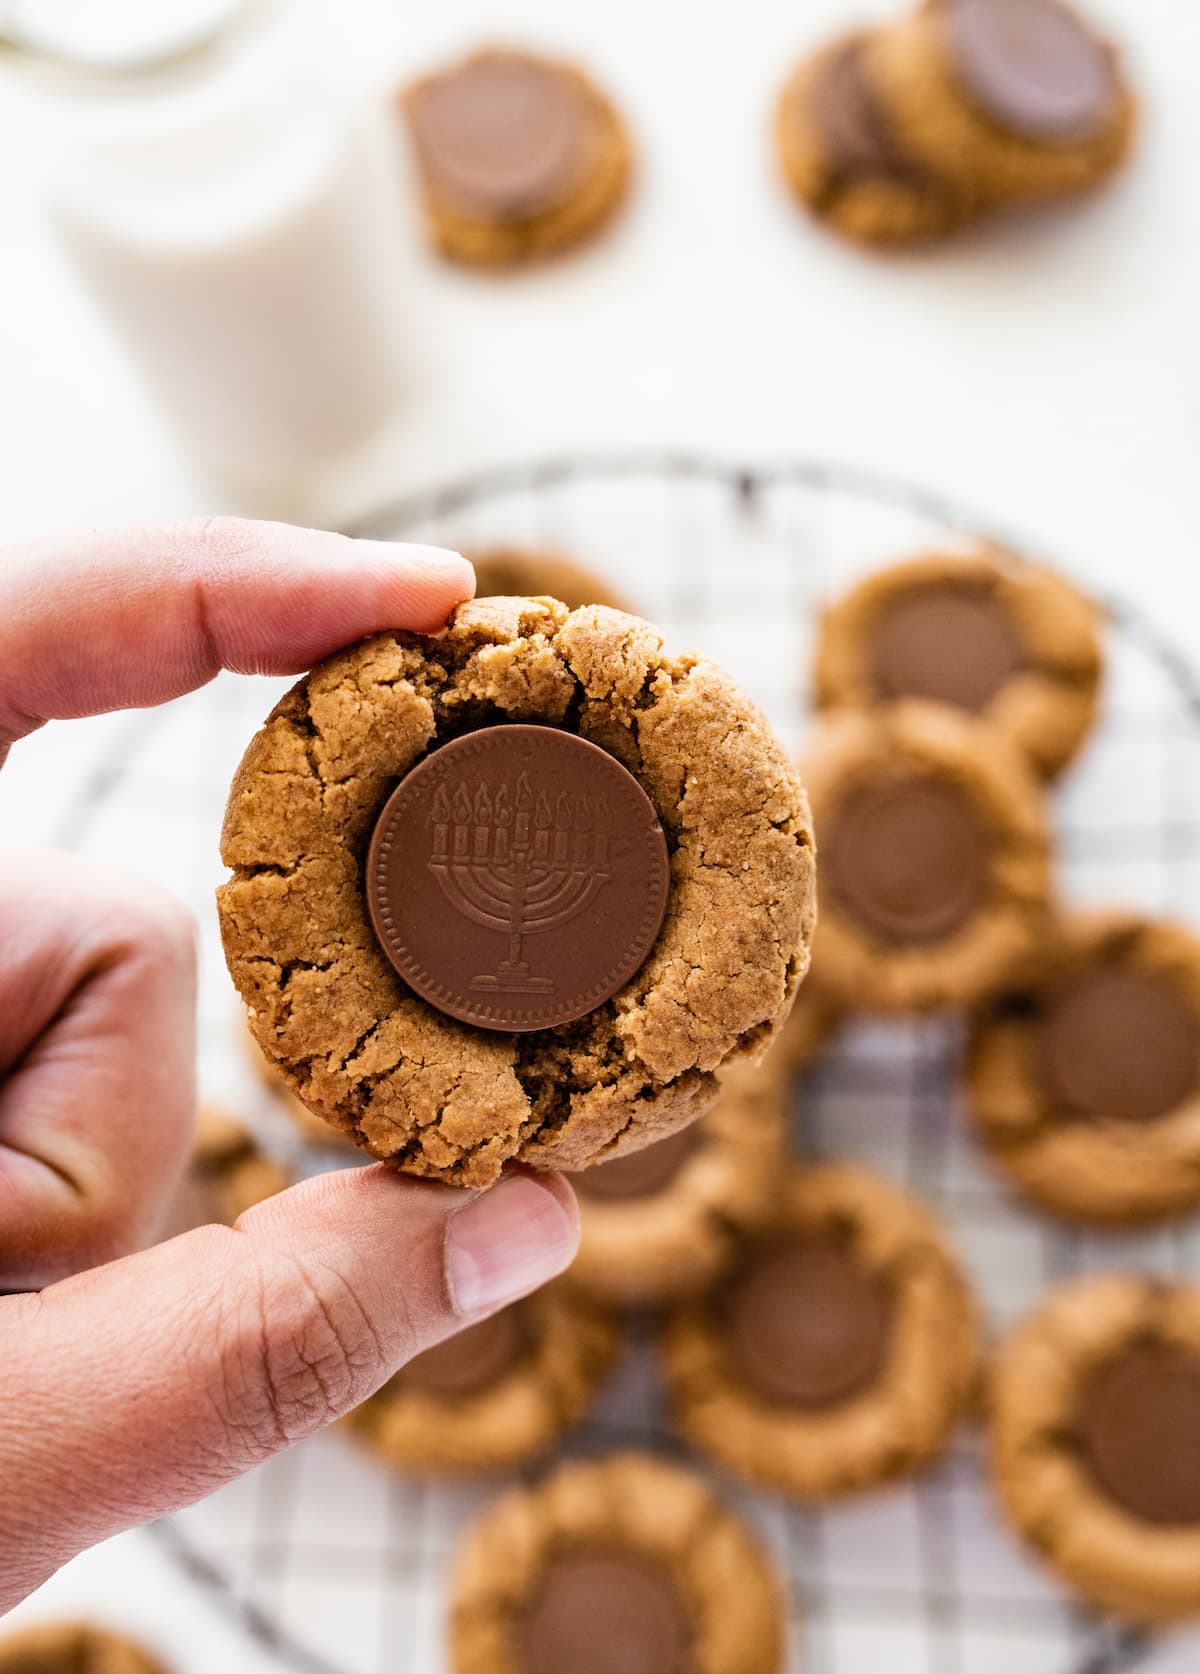 A hand holding a peanut butter blossom that has a chocolate coin that depicts a menorah in the center of each cookie.